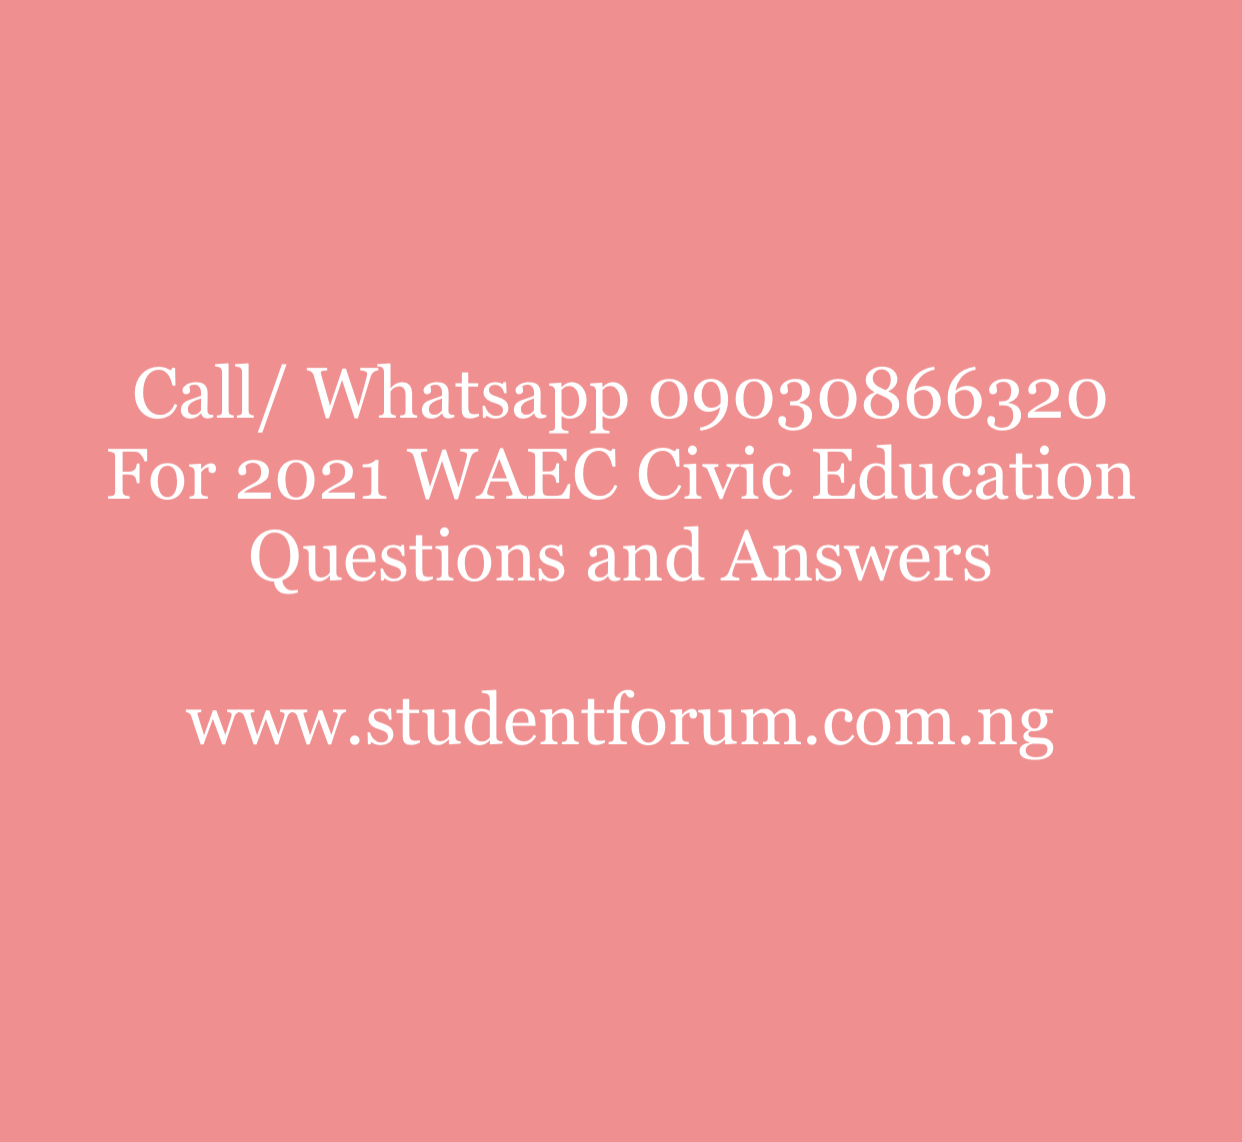 Article about 2021 waec civic education answers free 2021 waec civic runz expo obj and essay